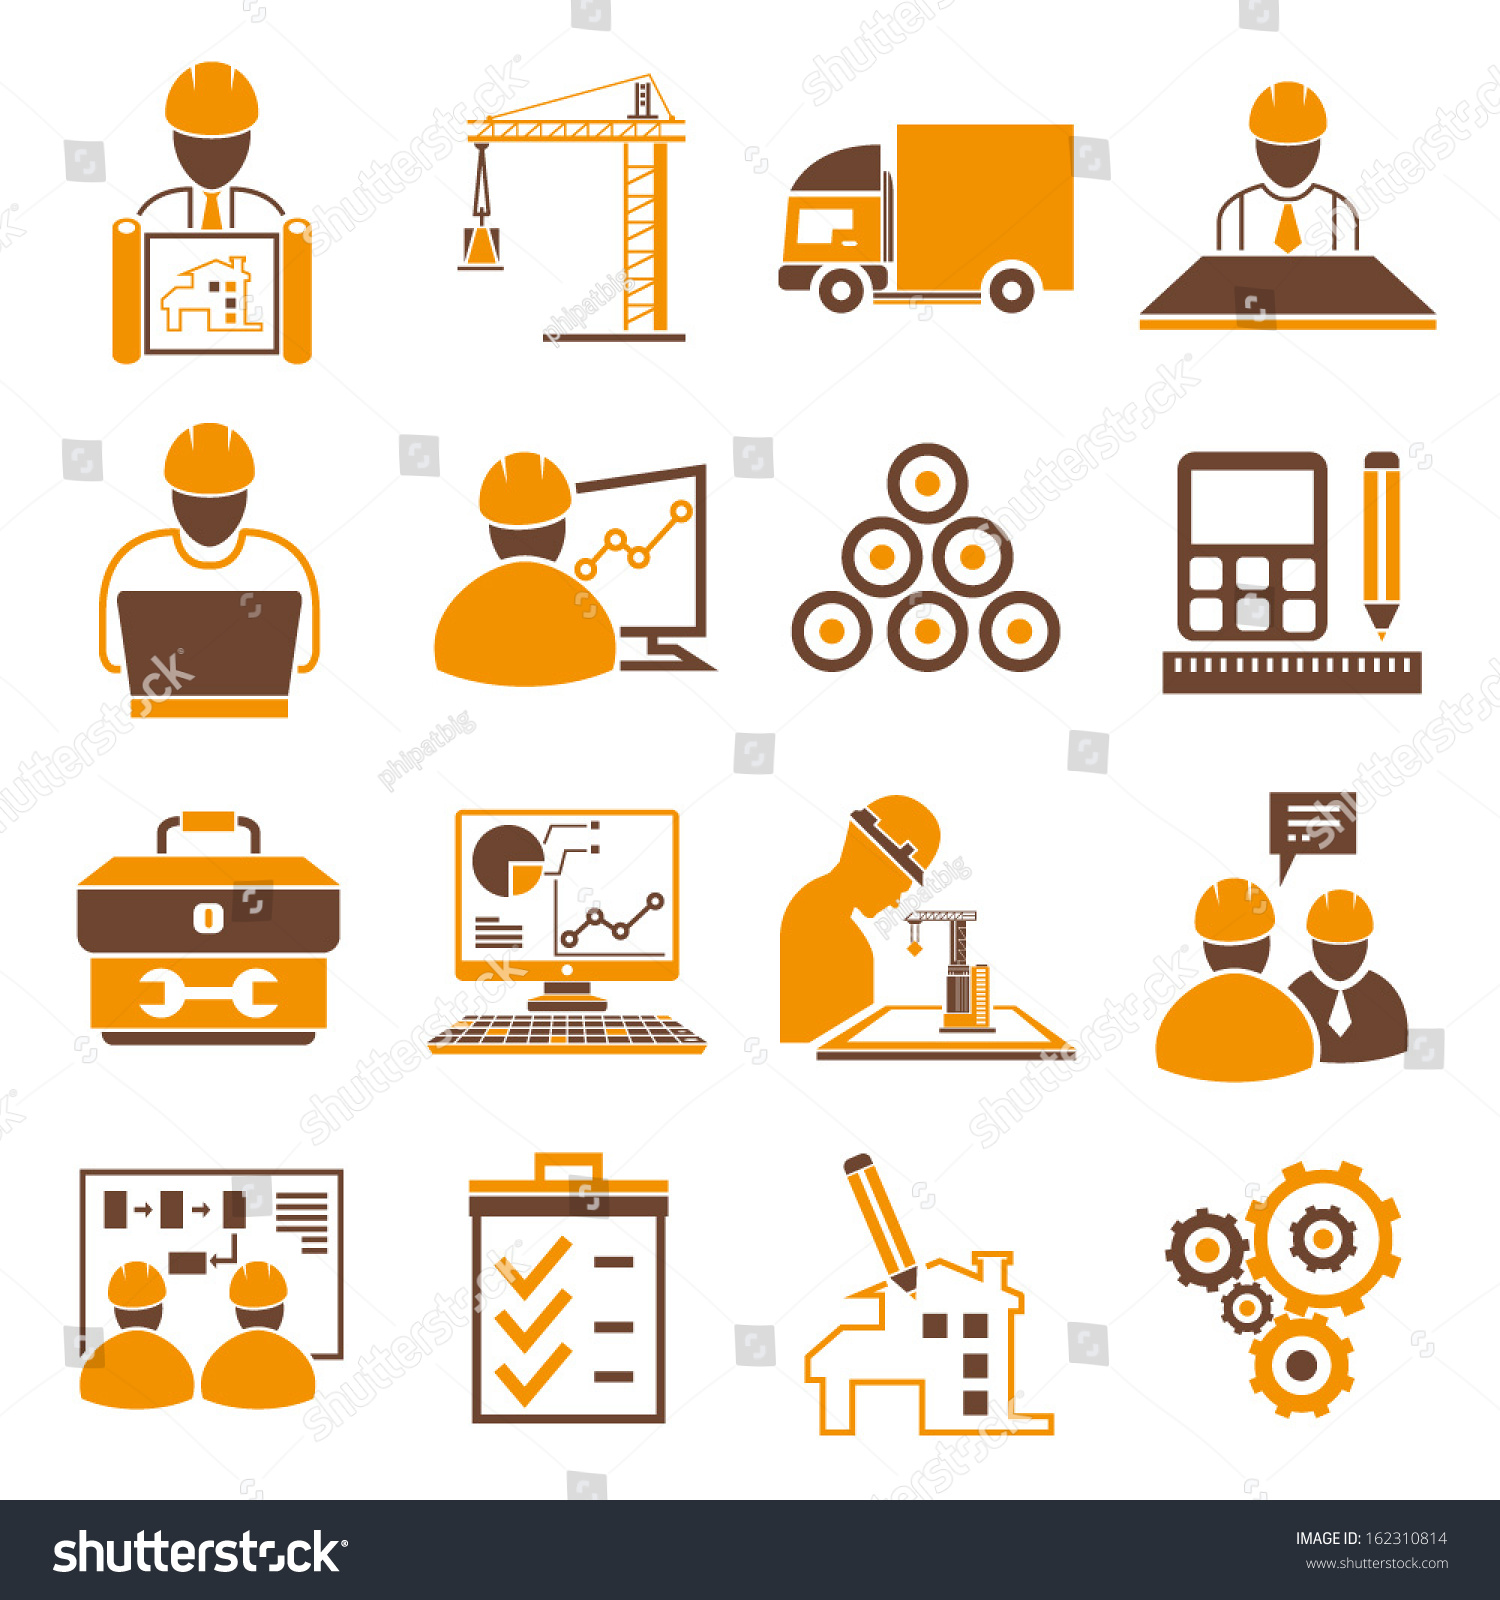 industrial automation clipart - photo #29